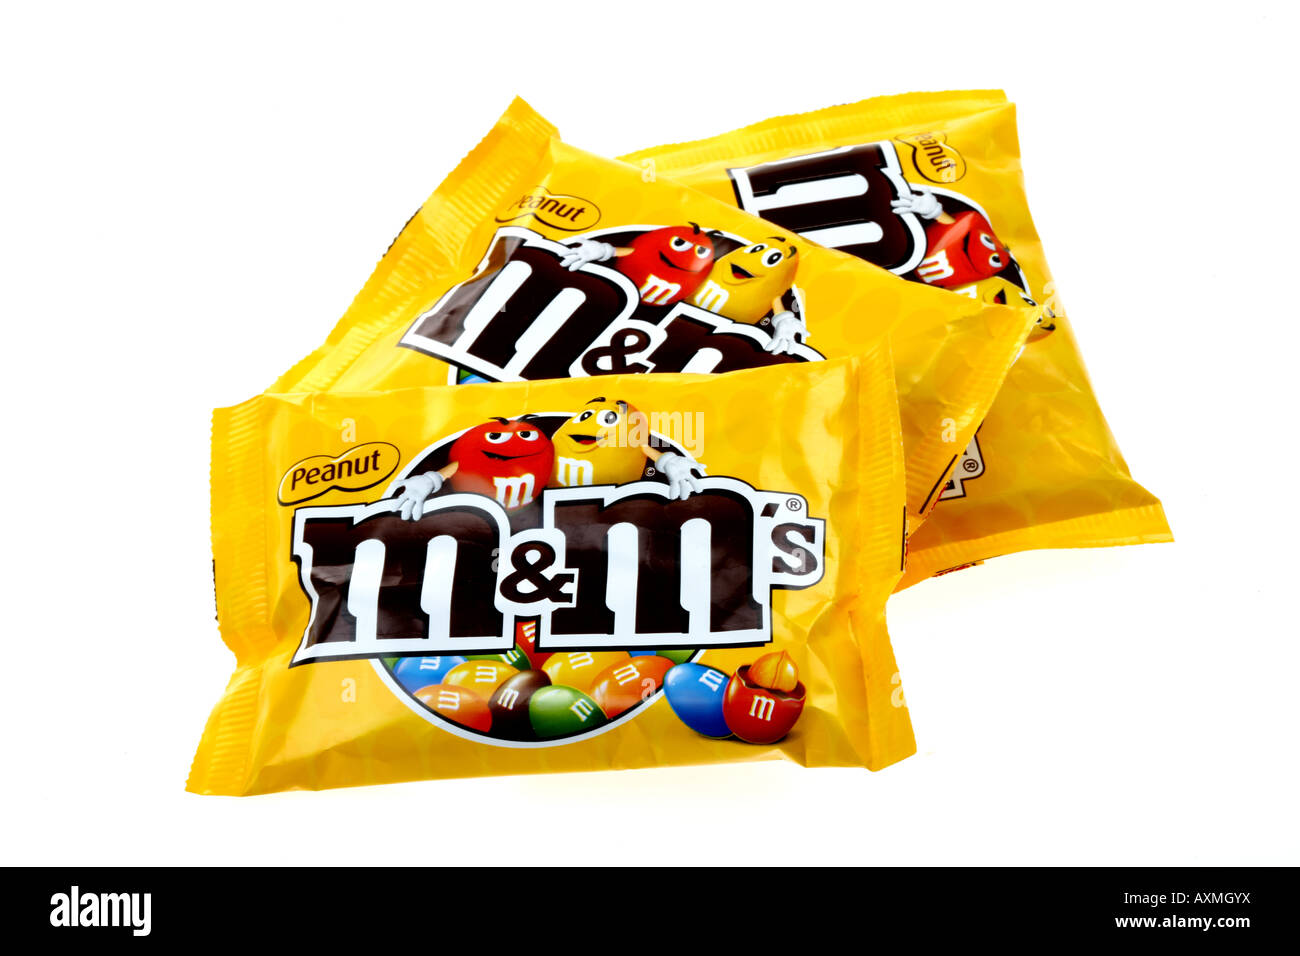 M&Ms Tote Shopping Bag Peanut Chocolate Sweets Yellow Shopper Reusable Large